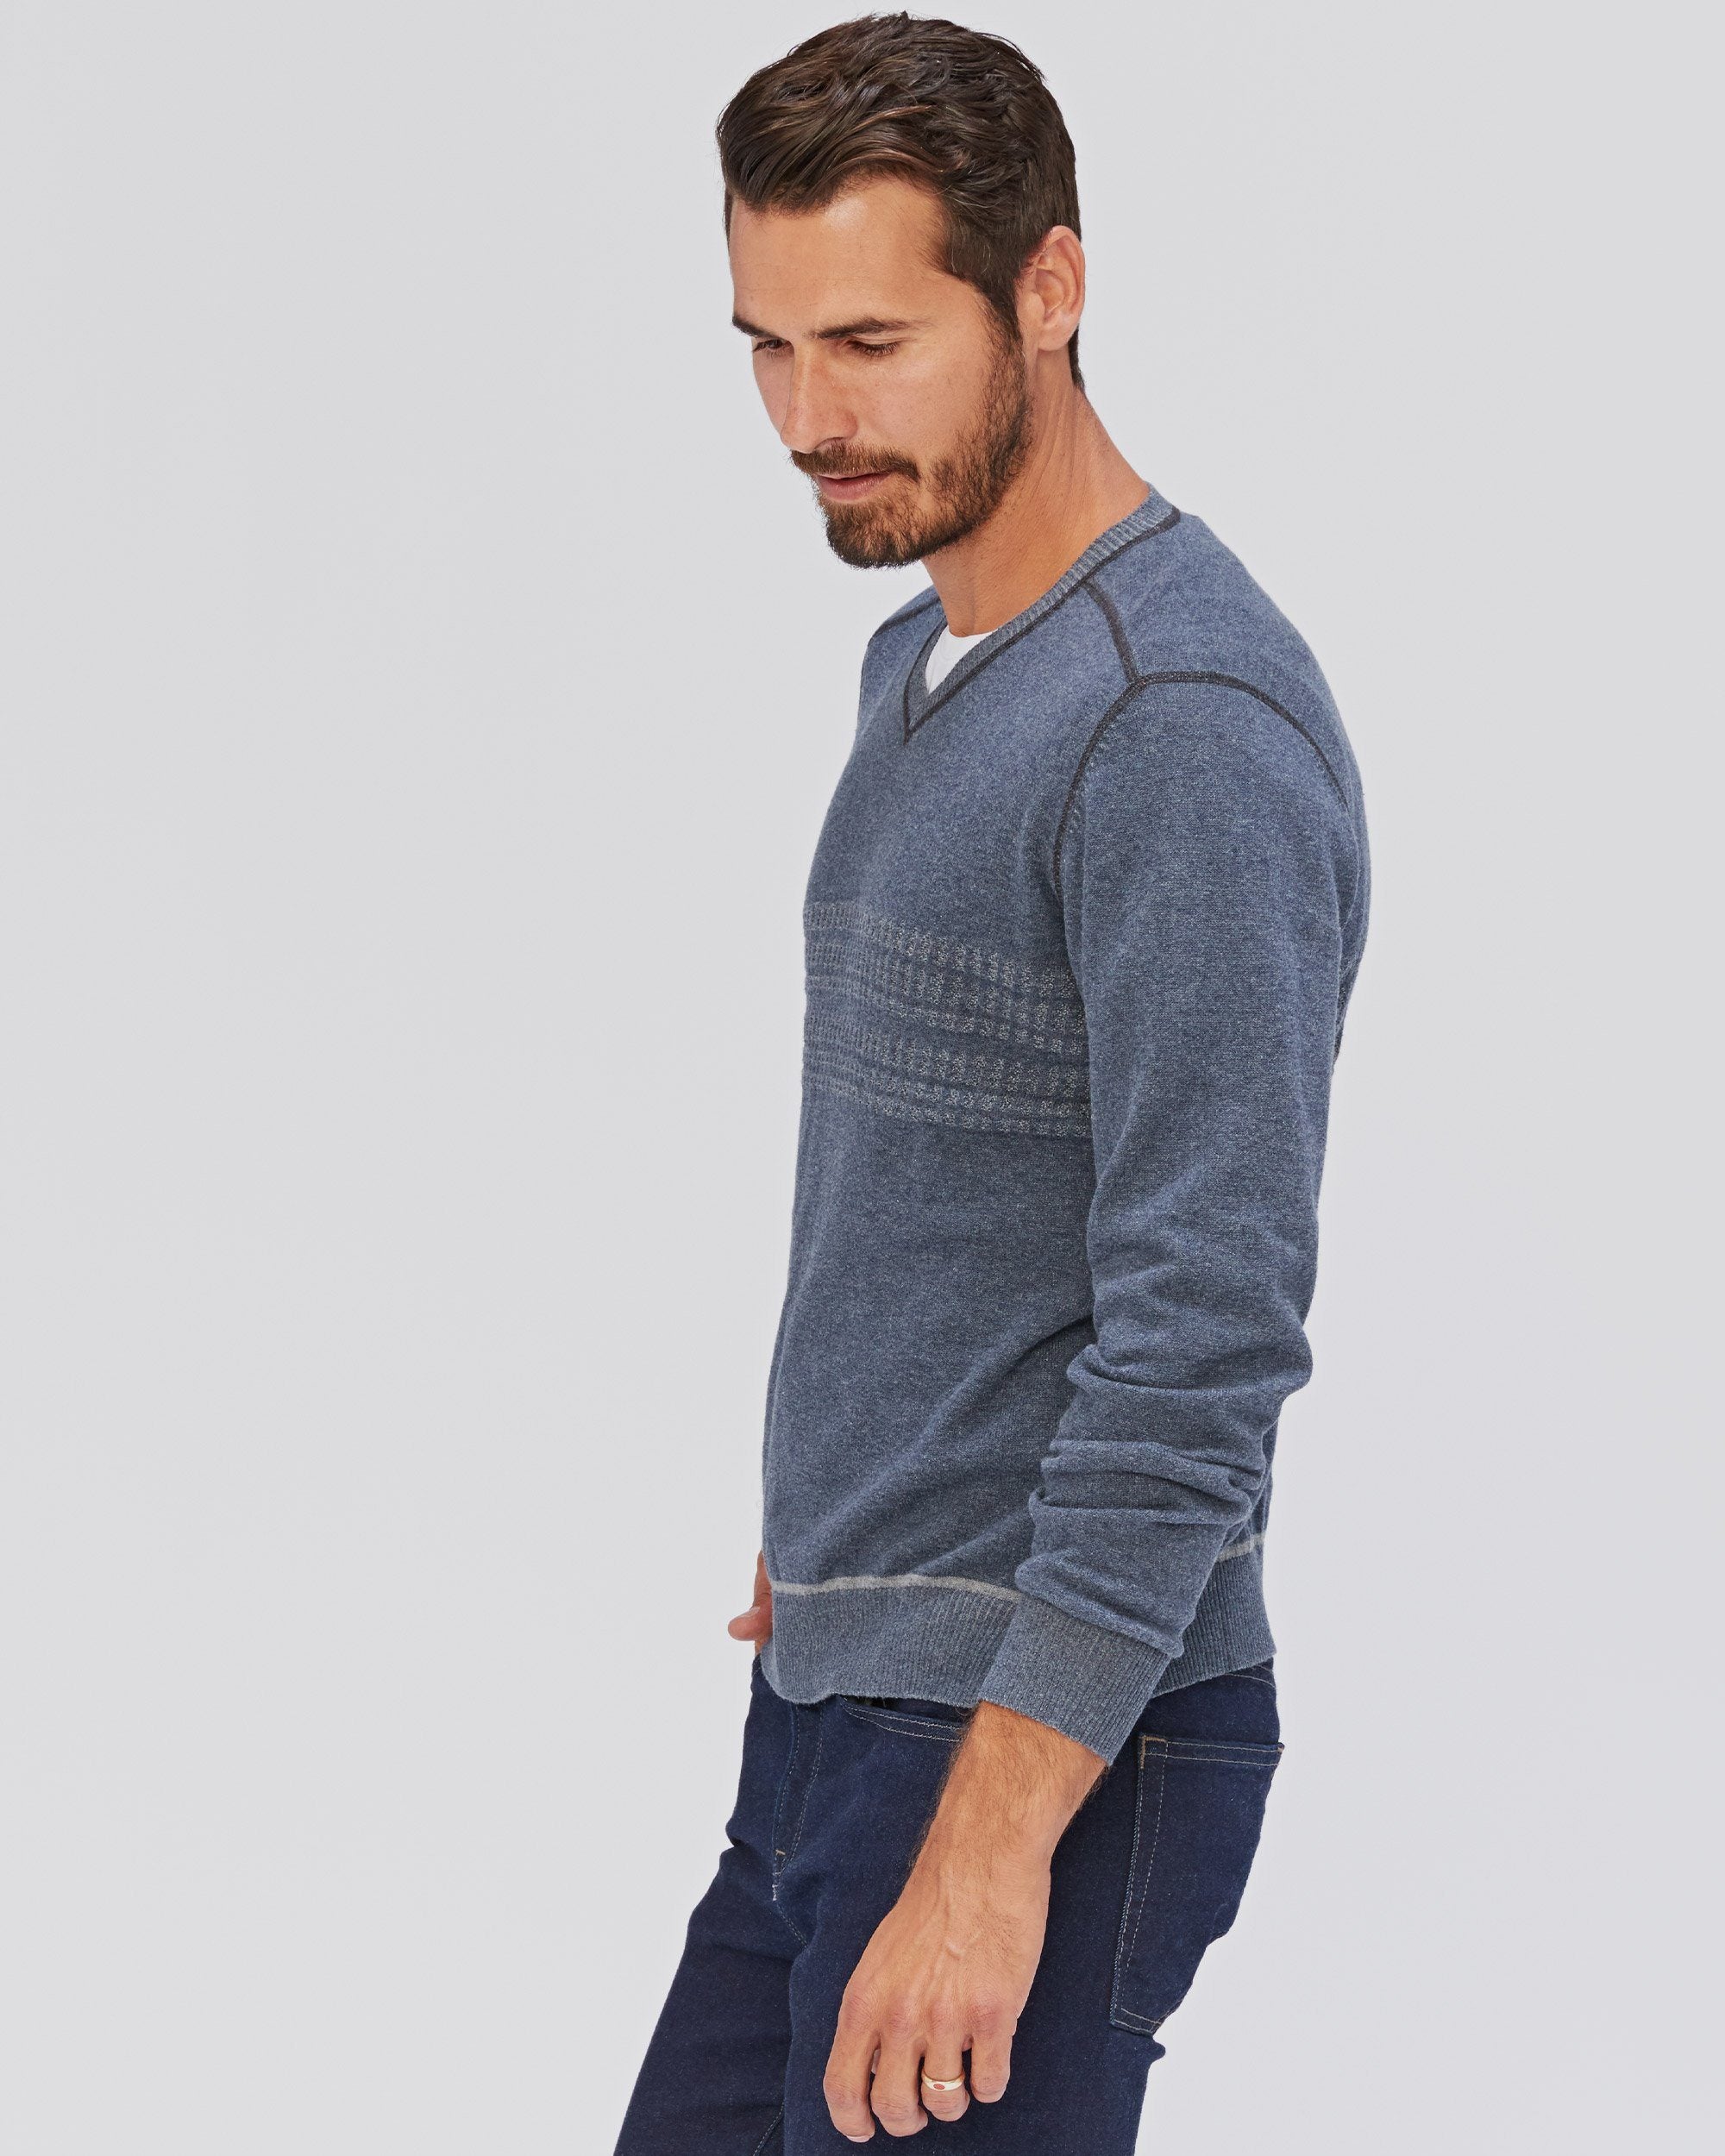 Gallant Double-Knit Vee – Agave Denim